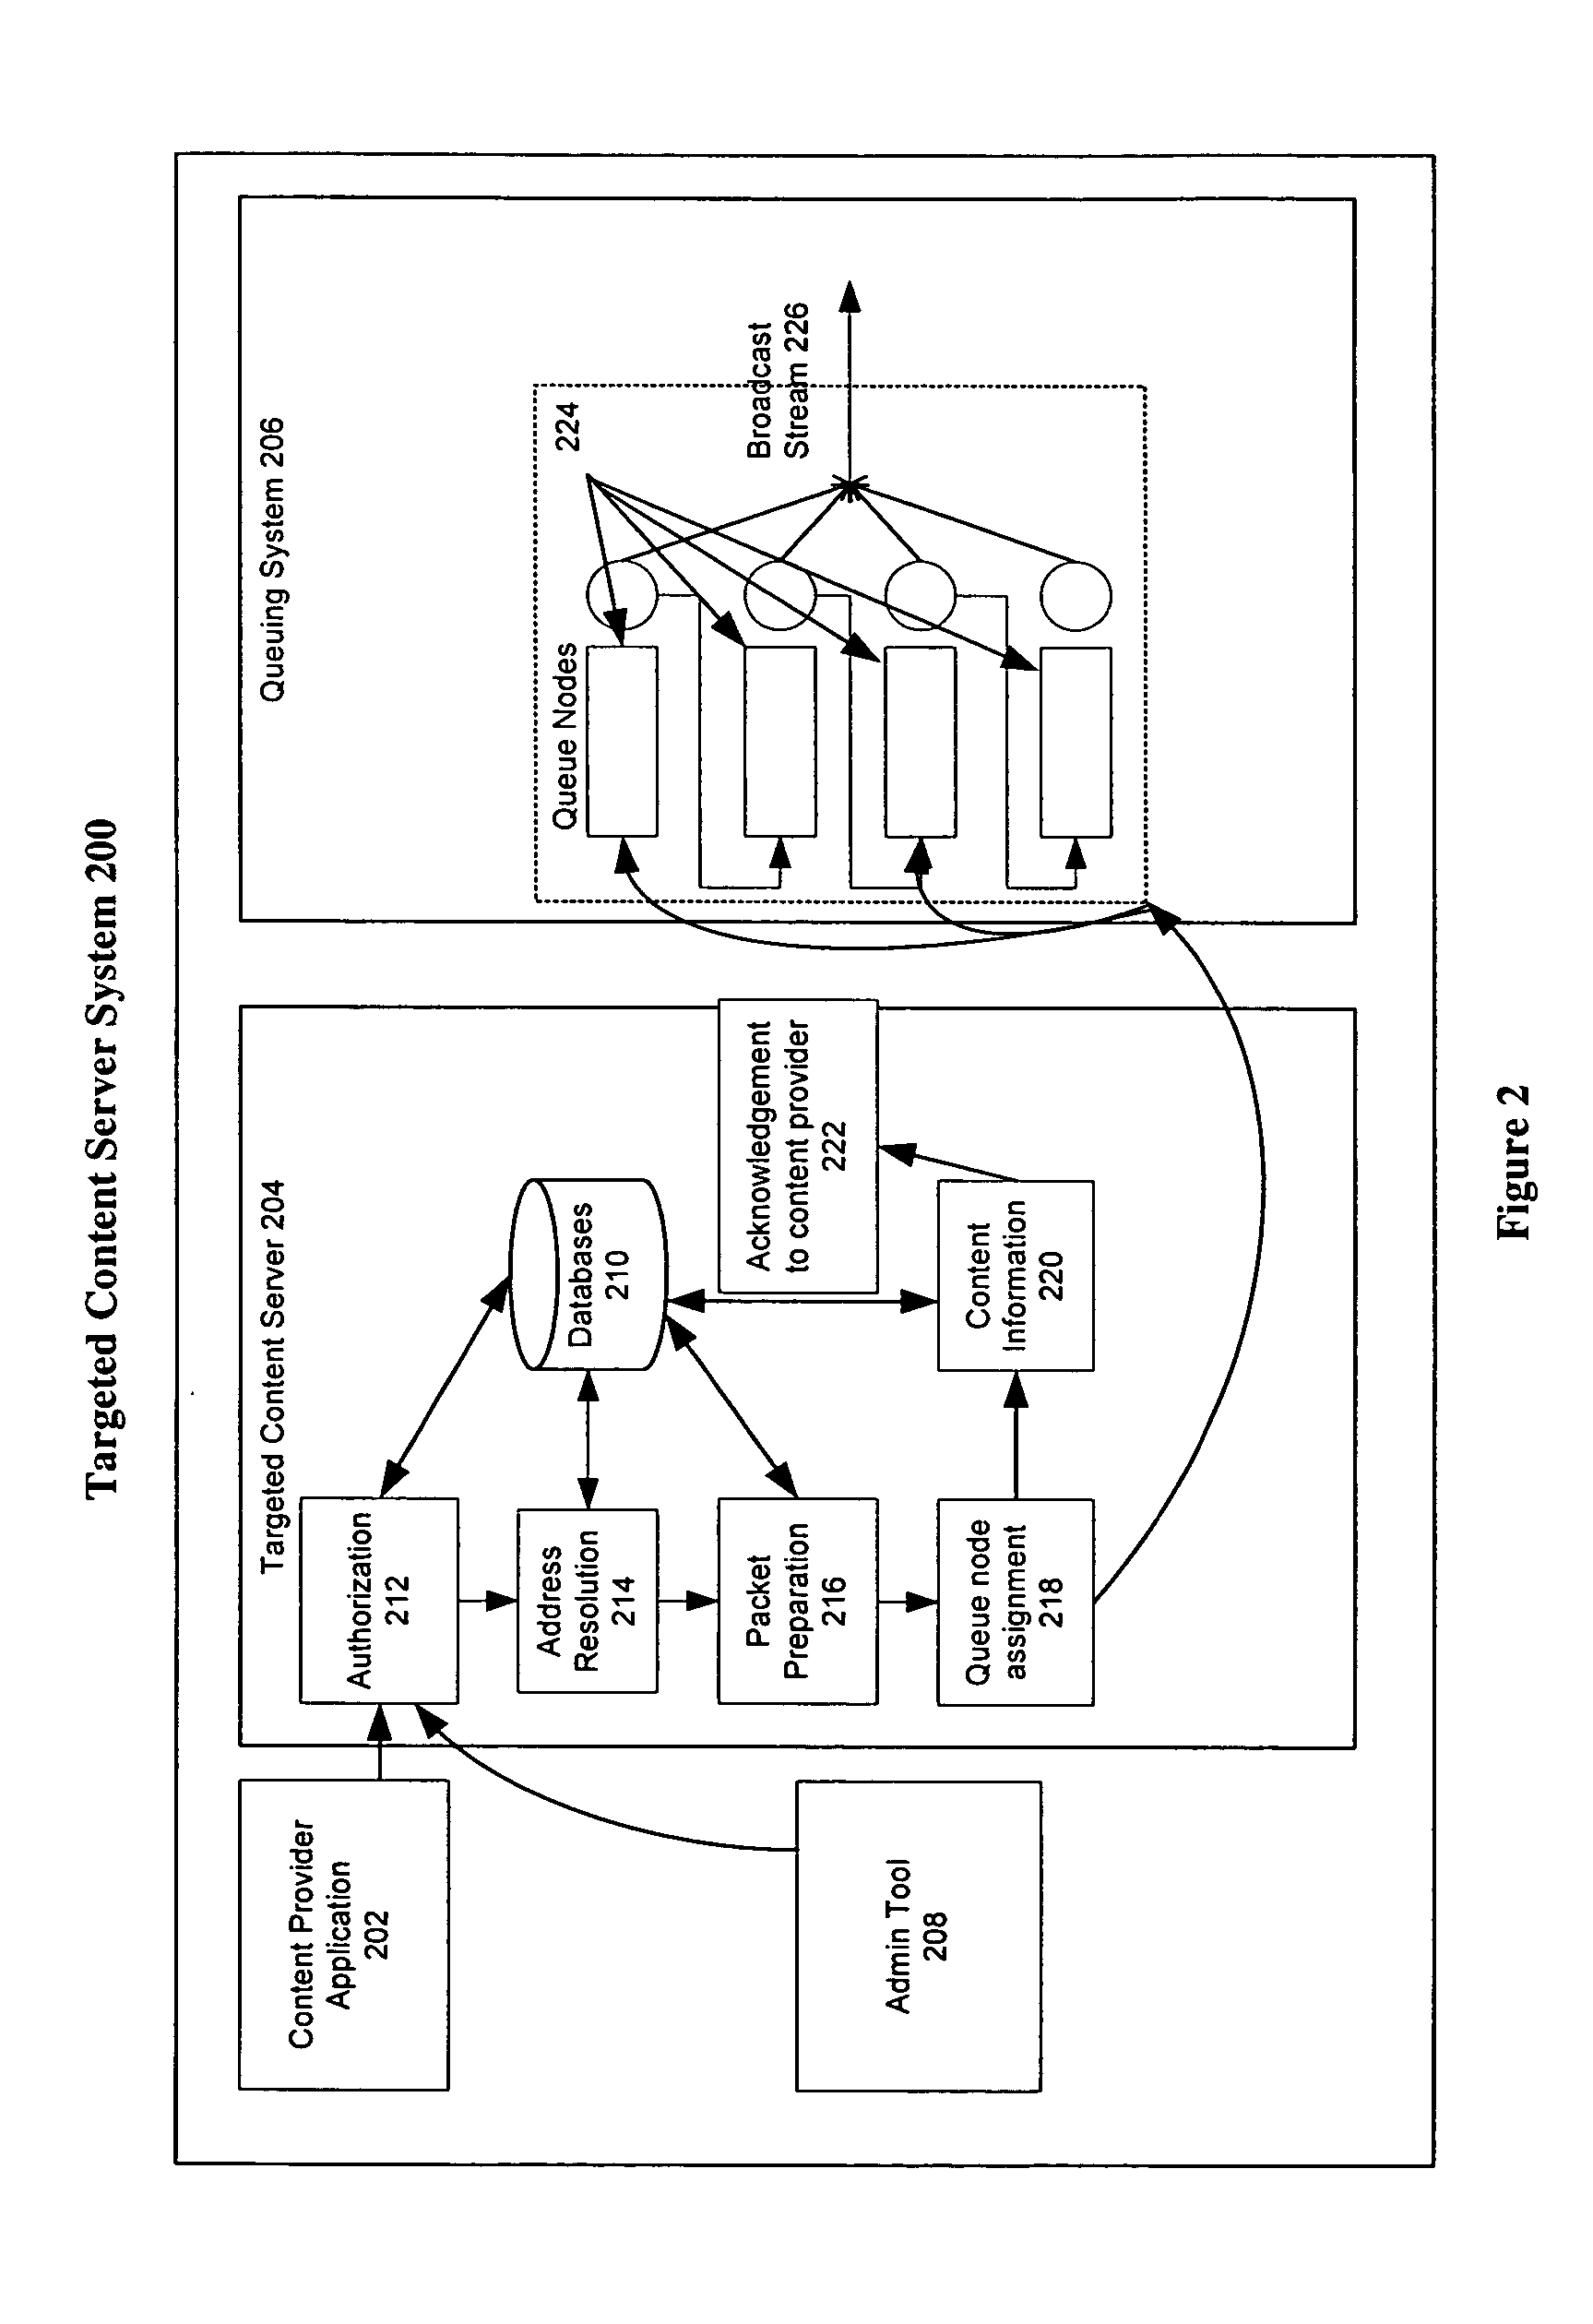 Targeted content broadcast and reception system